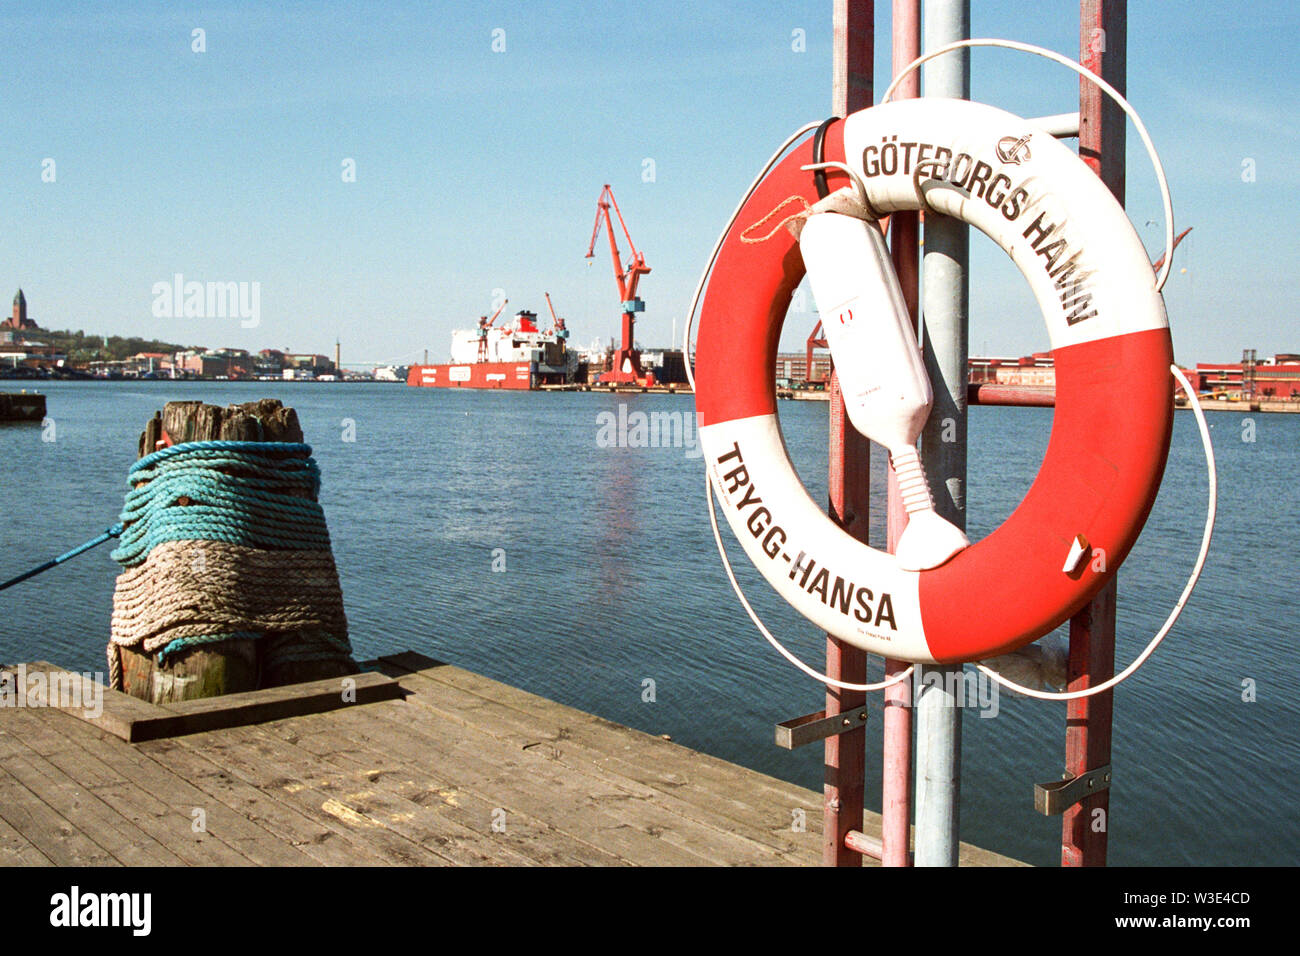 Gothenburg Harbor Swedenthe busiest shipping port in the Nordic countries. Stock Photo